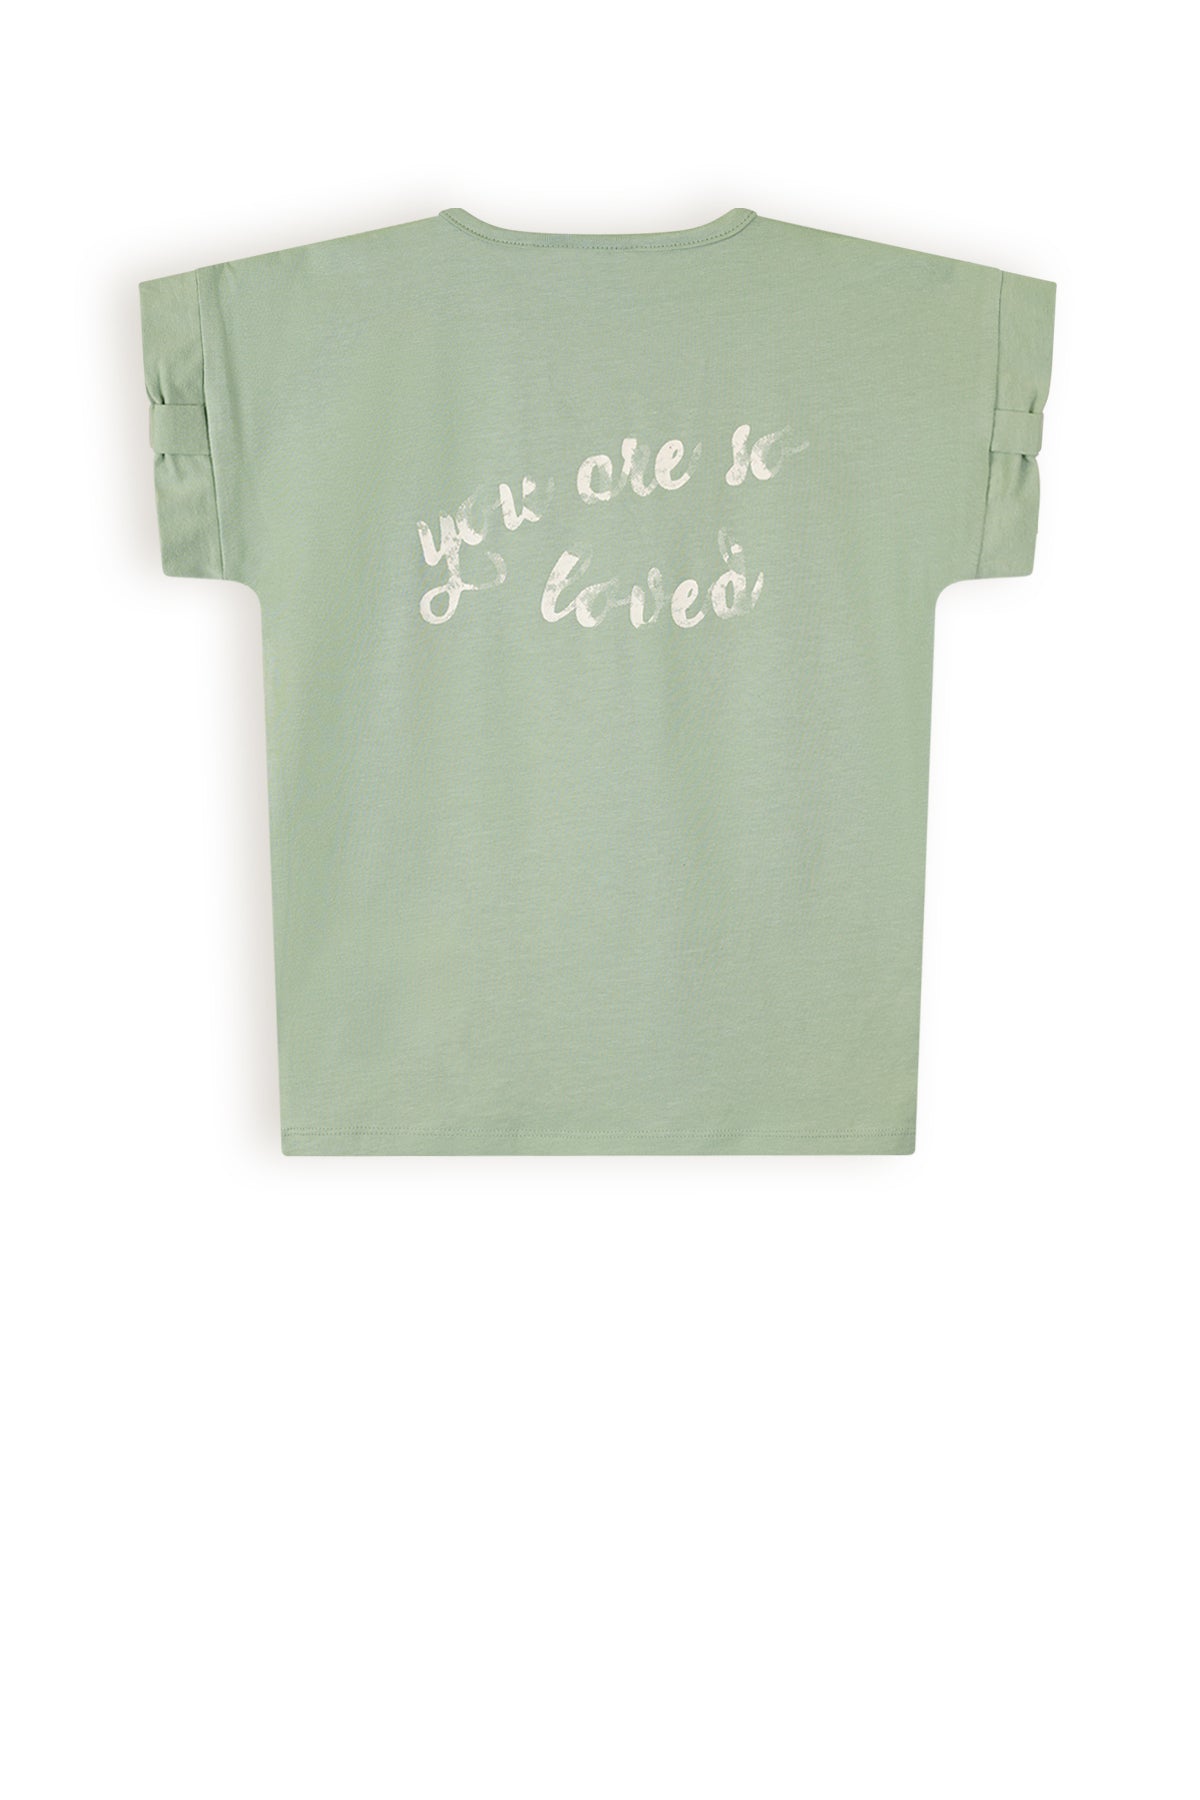 NoNo Kamelle T-Shirt: You Are So Loved